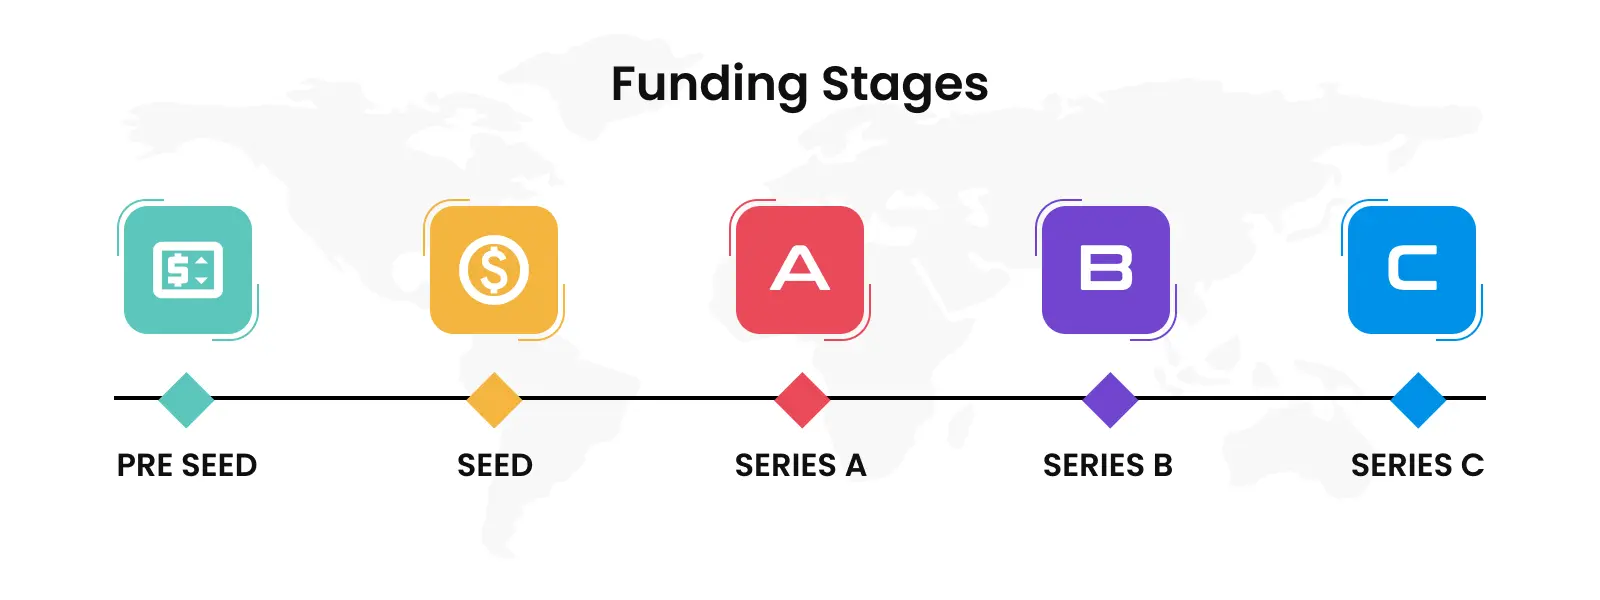 Funding Stages